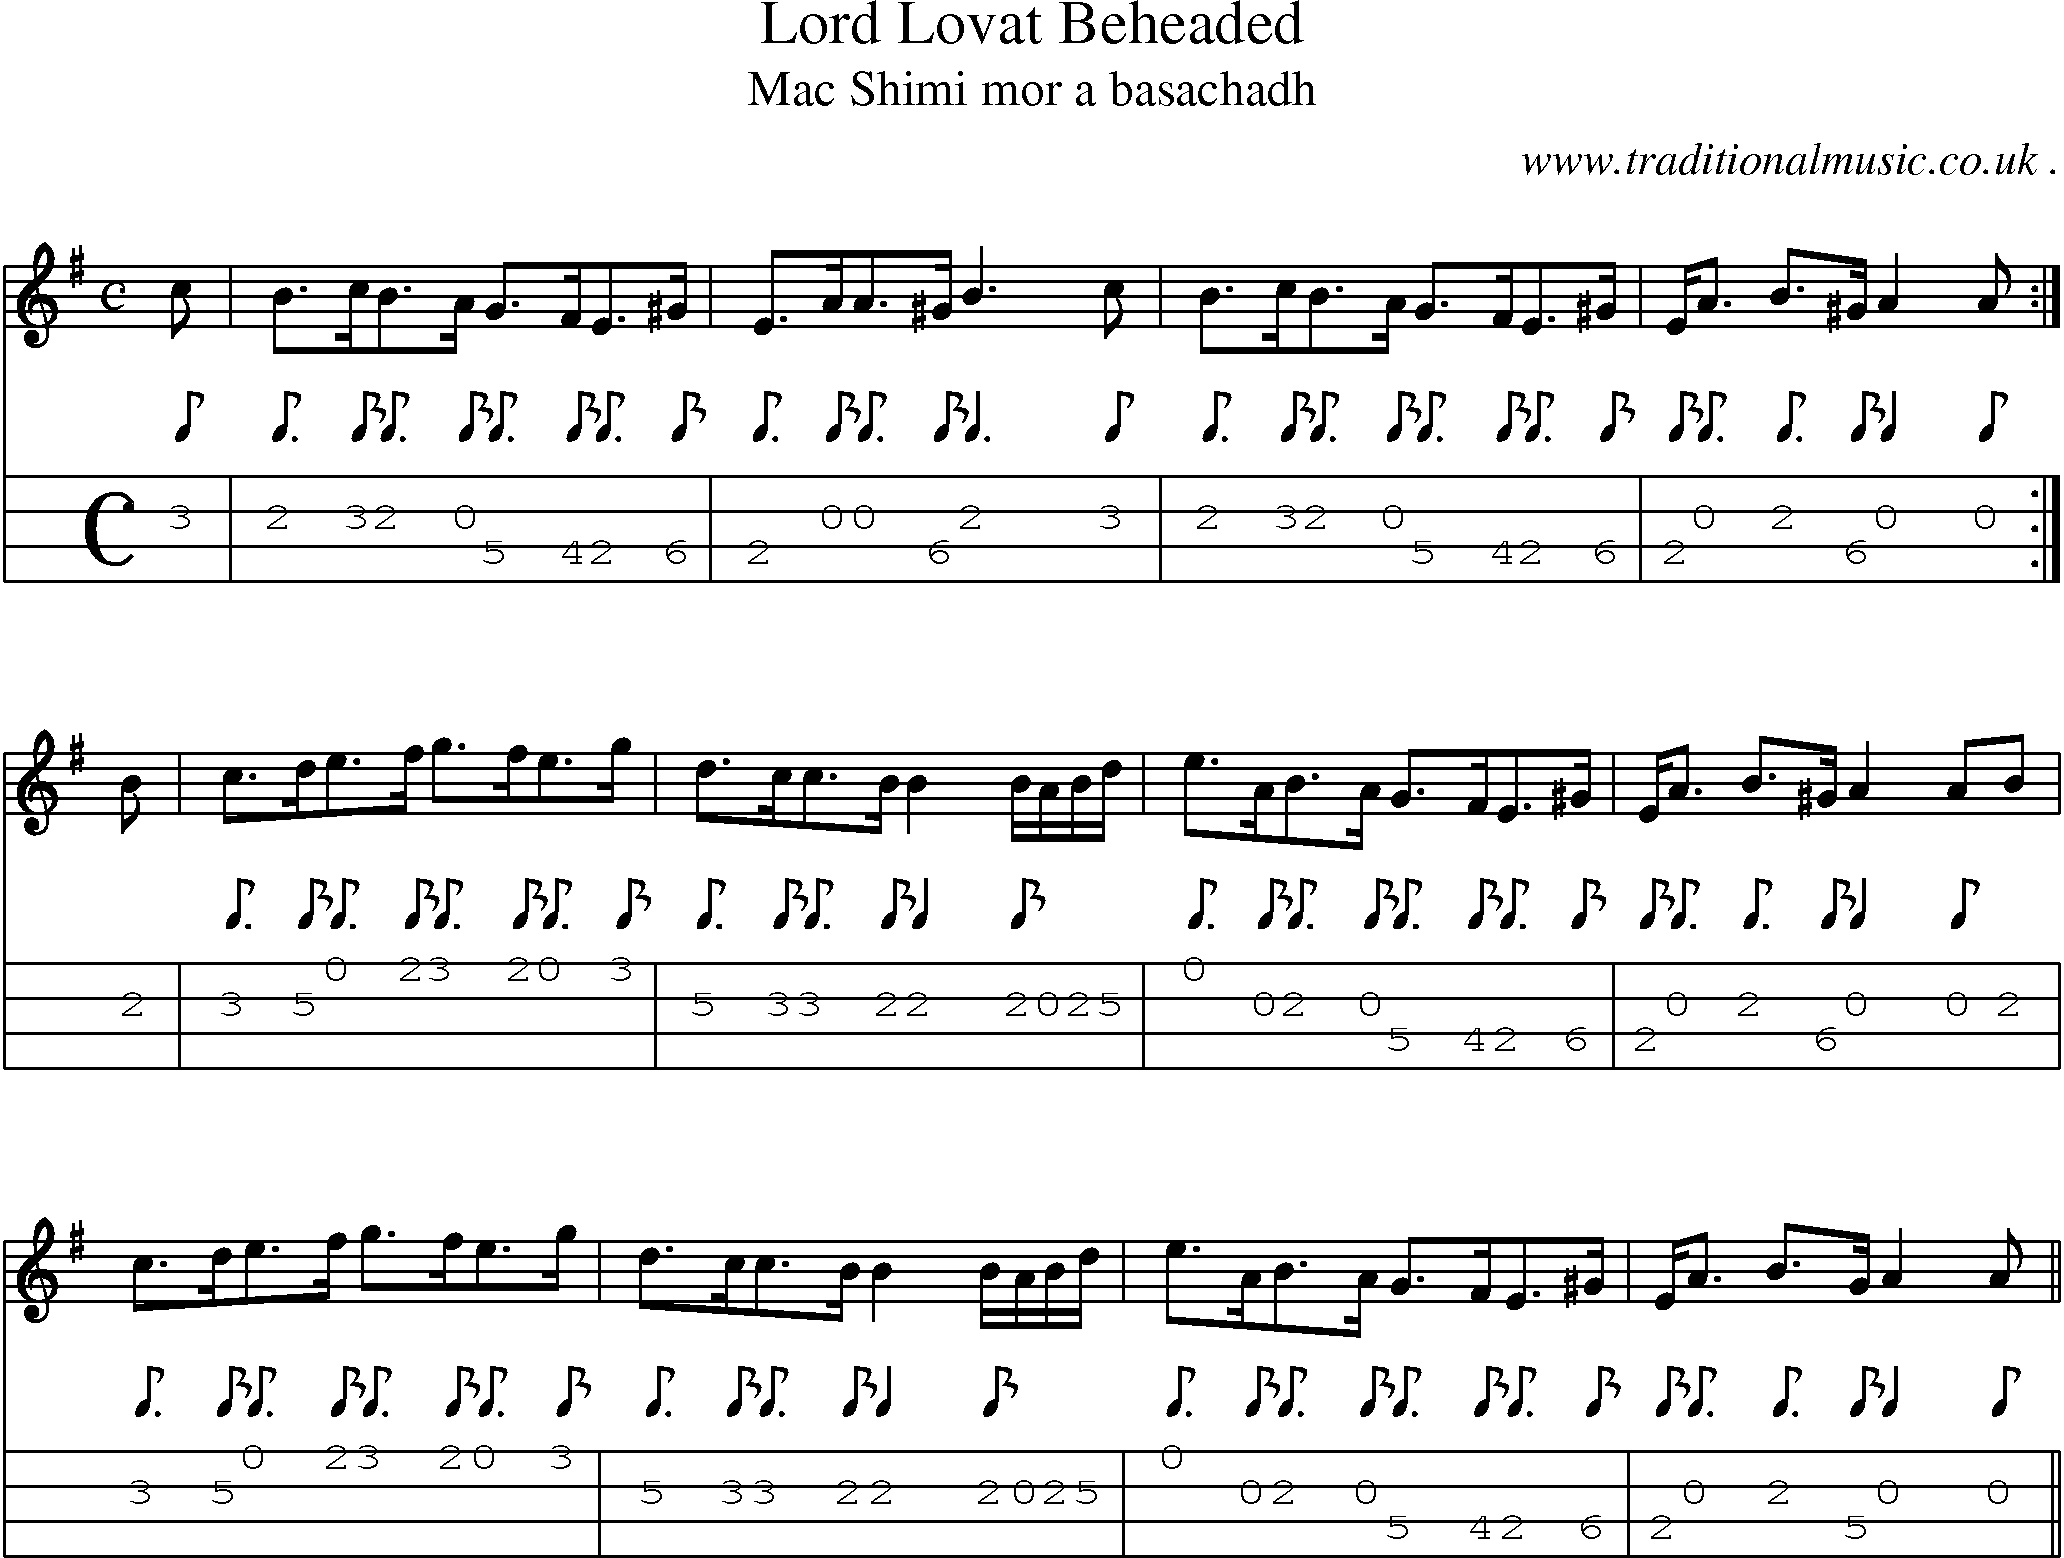 Sheet-music  score, Chords and Mandolin Tabs for Lord Lovat Beheaded